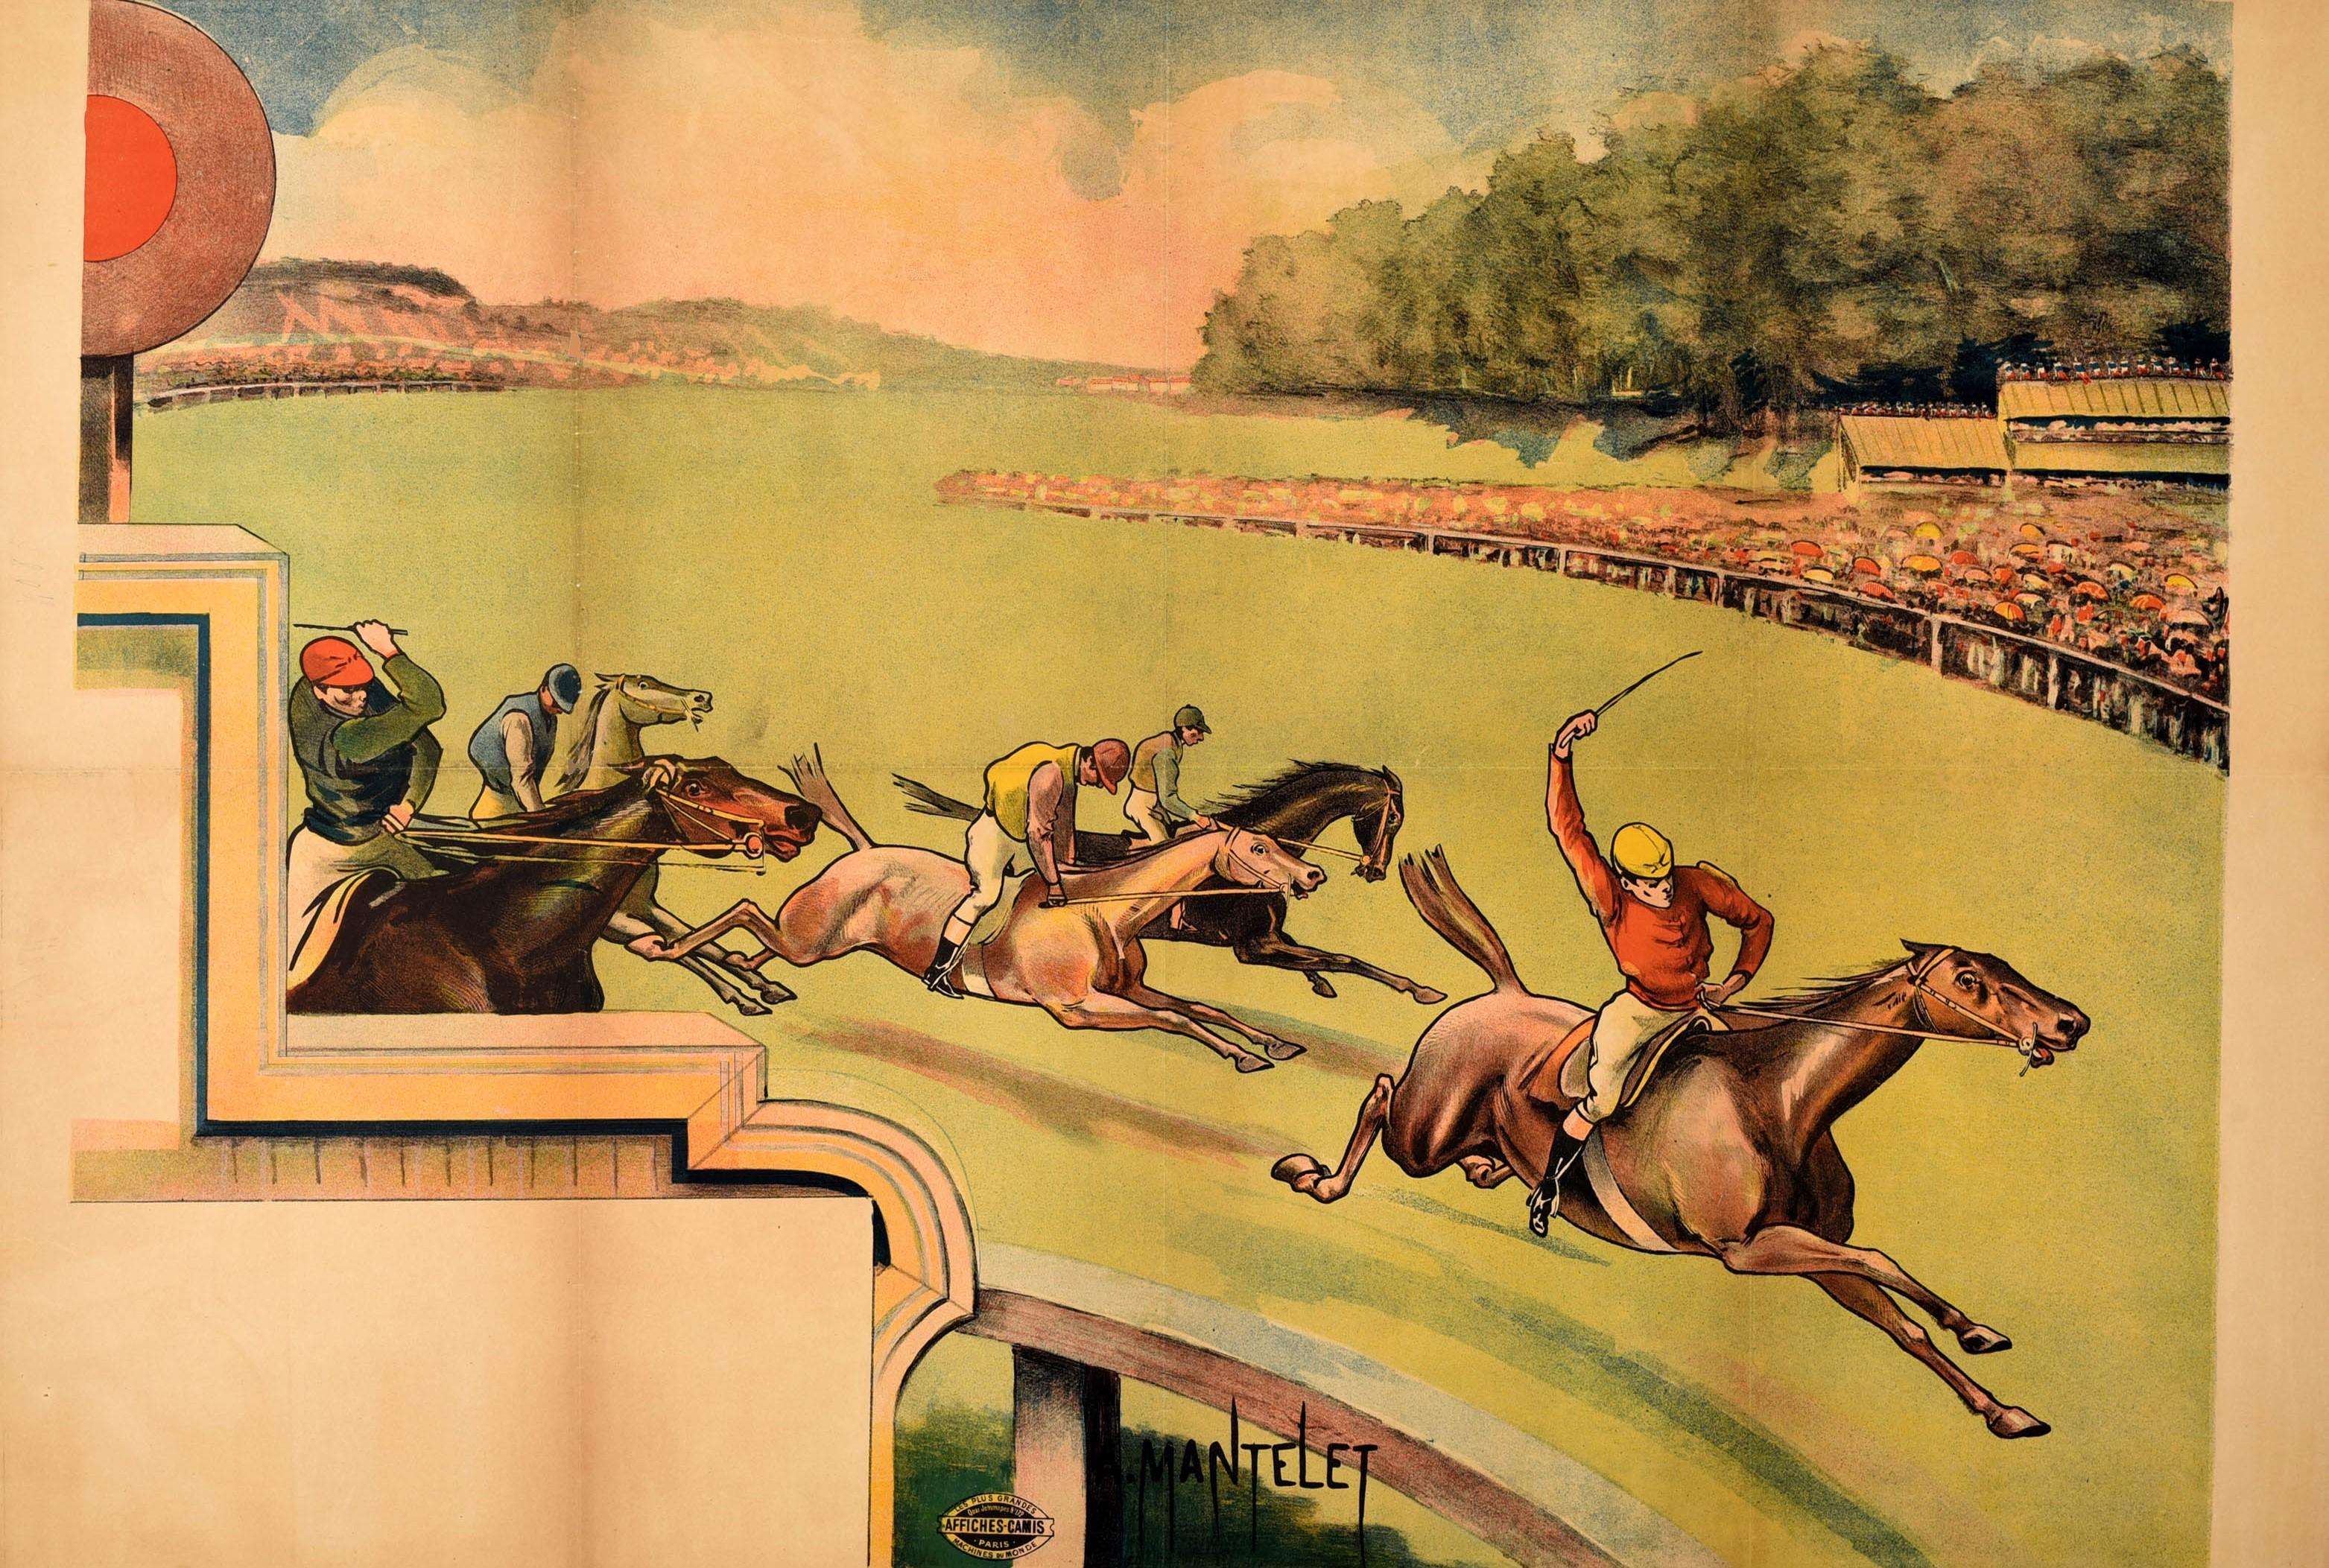 Original antique equestrian sport poster for horse racing featuring an illustration by the painter Albert Mantelet (Albert Mantelet-Goguet; 1858-1958) depicting jockeys riding horses around a corner on a flat turf grass track towards the finish post